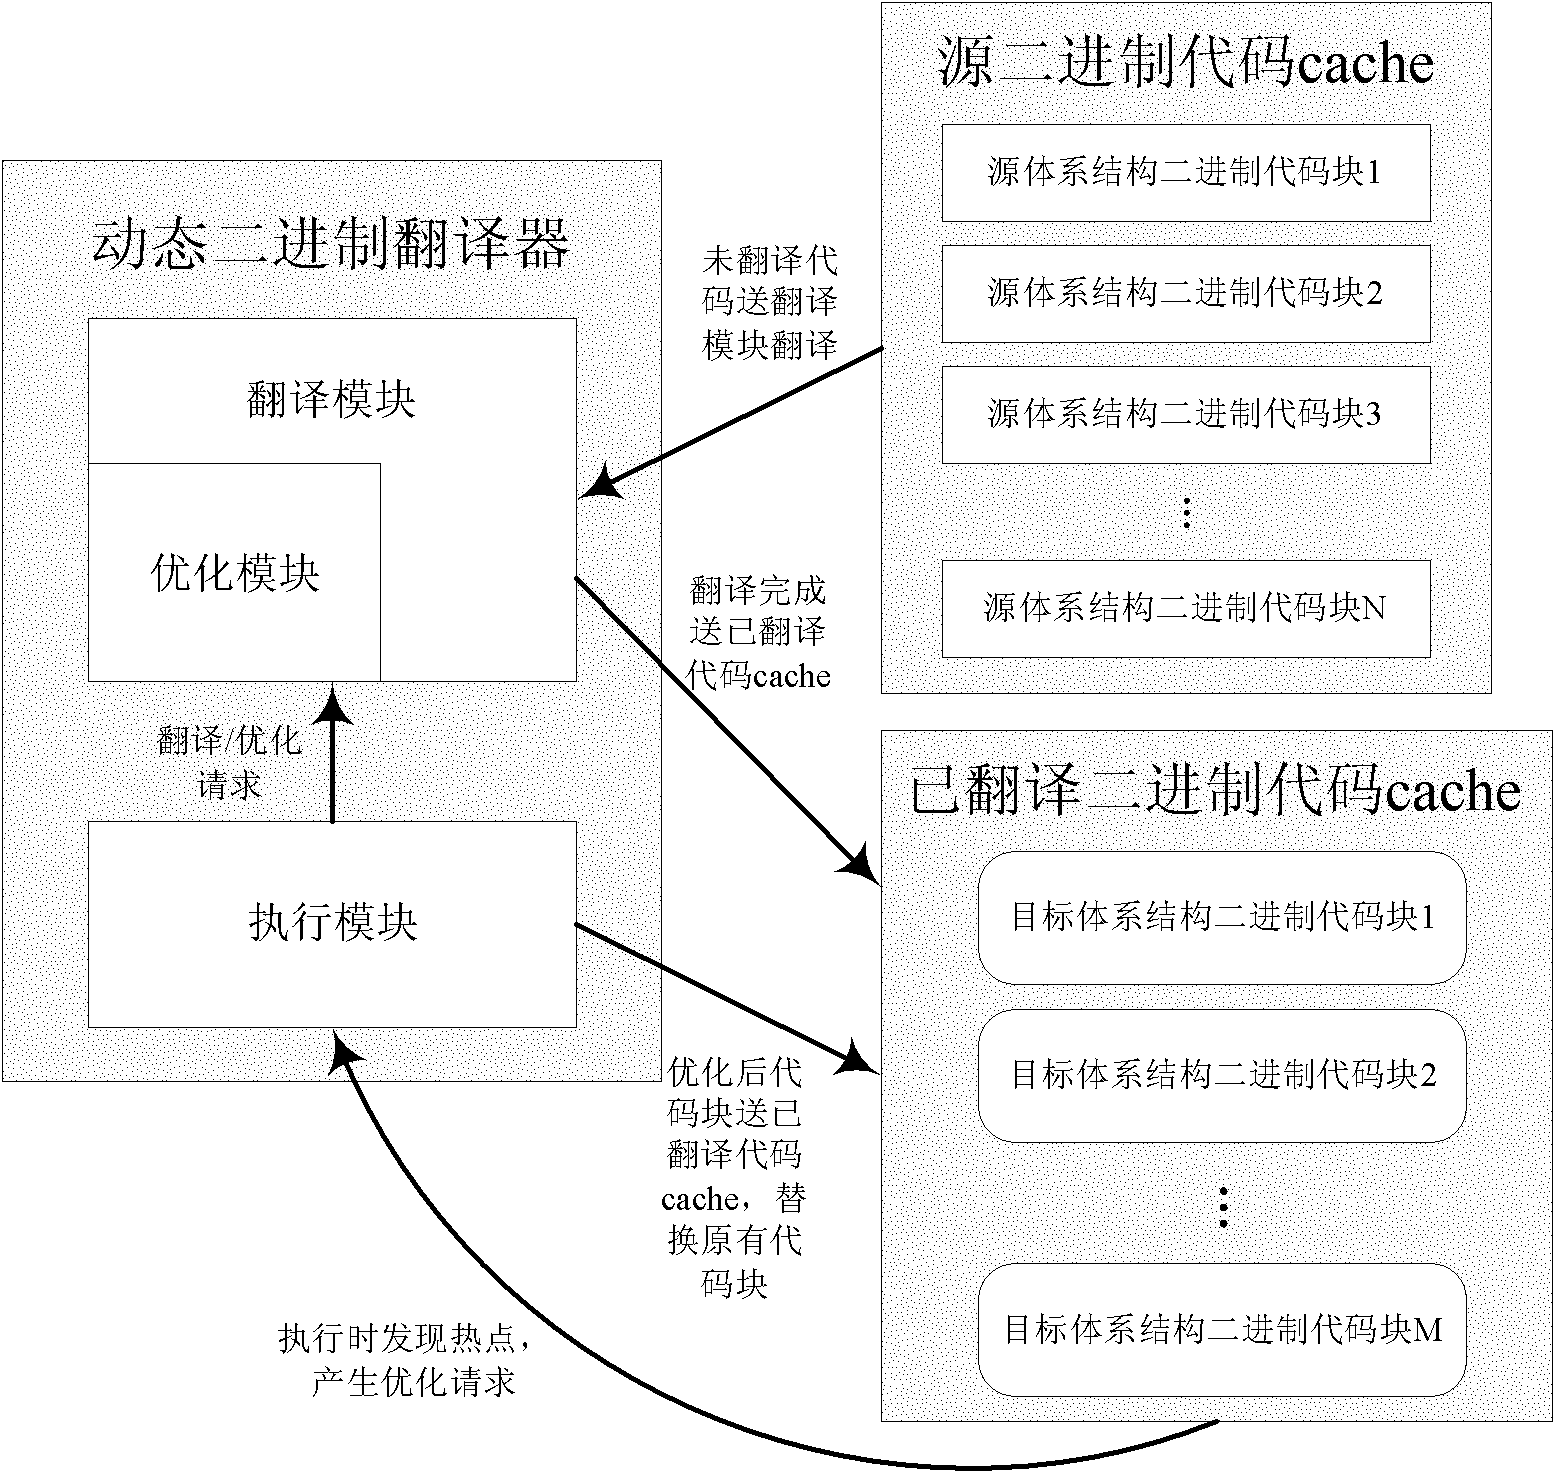 Multicore architecture supporting dynamic binary translation